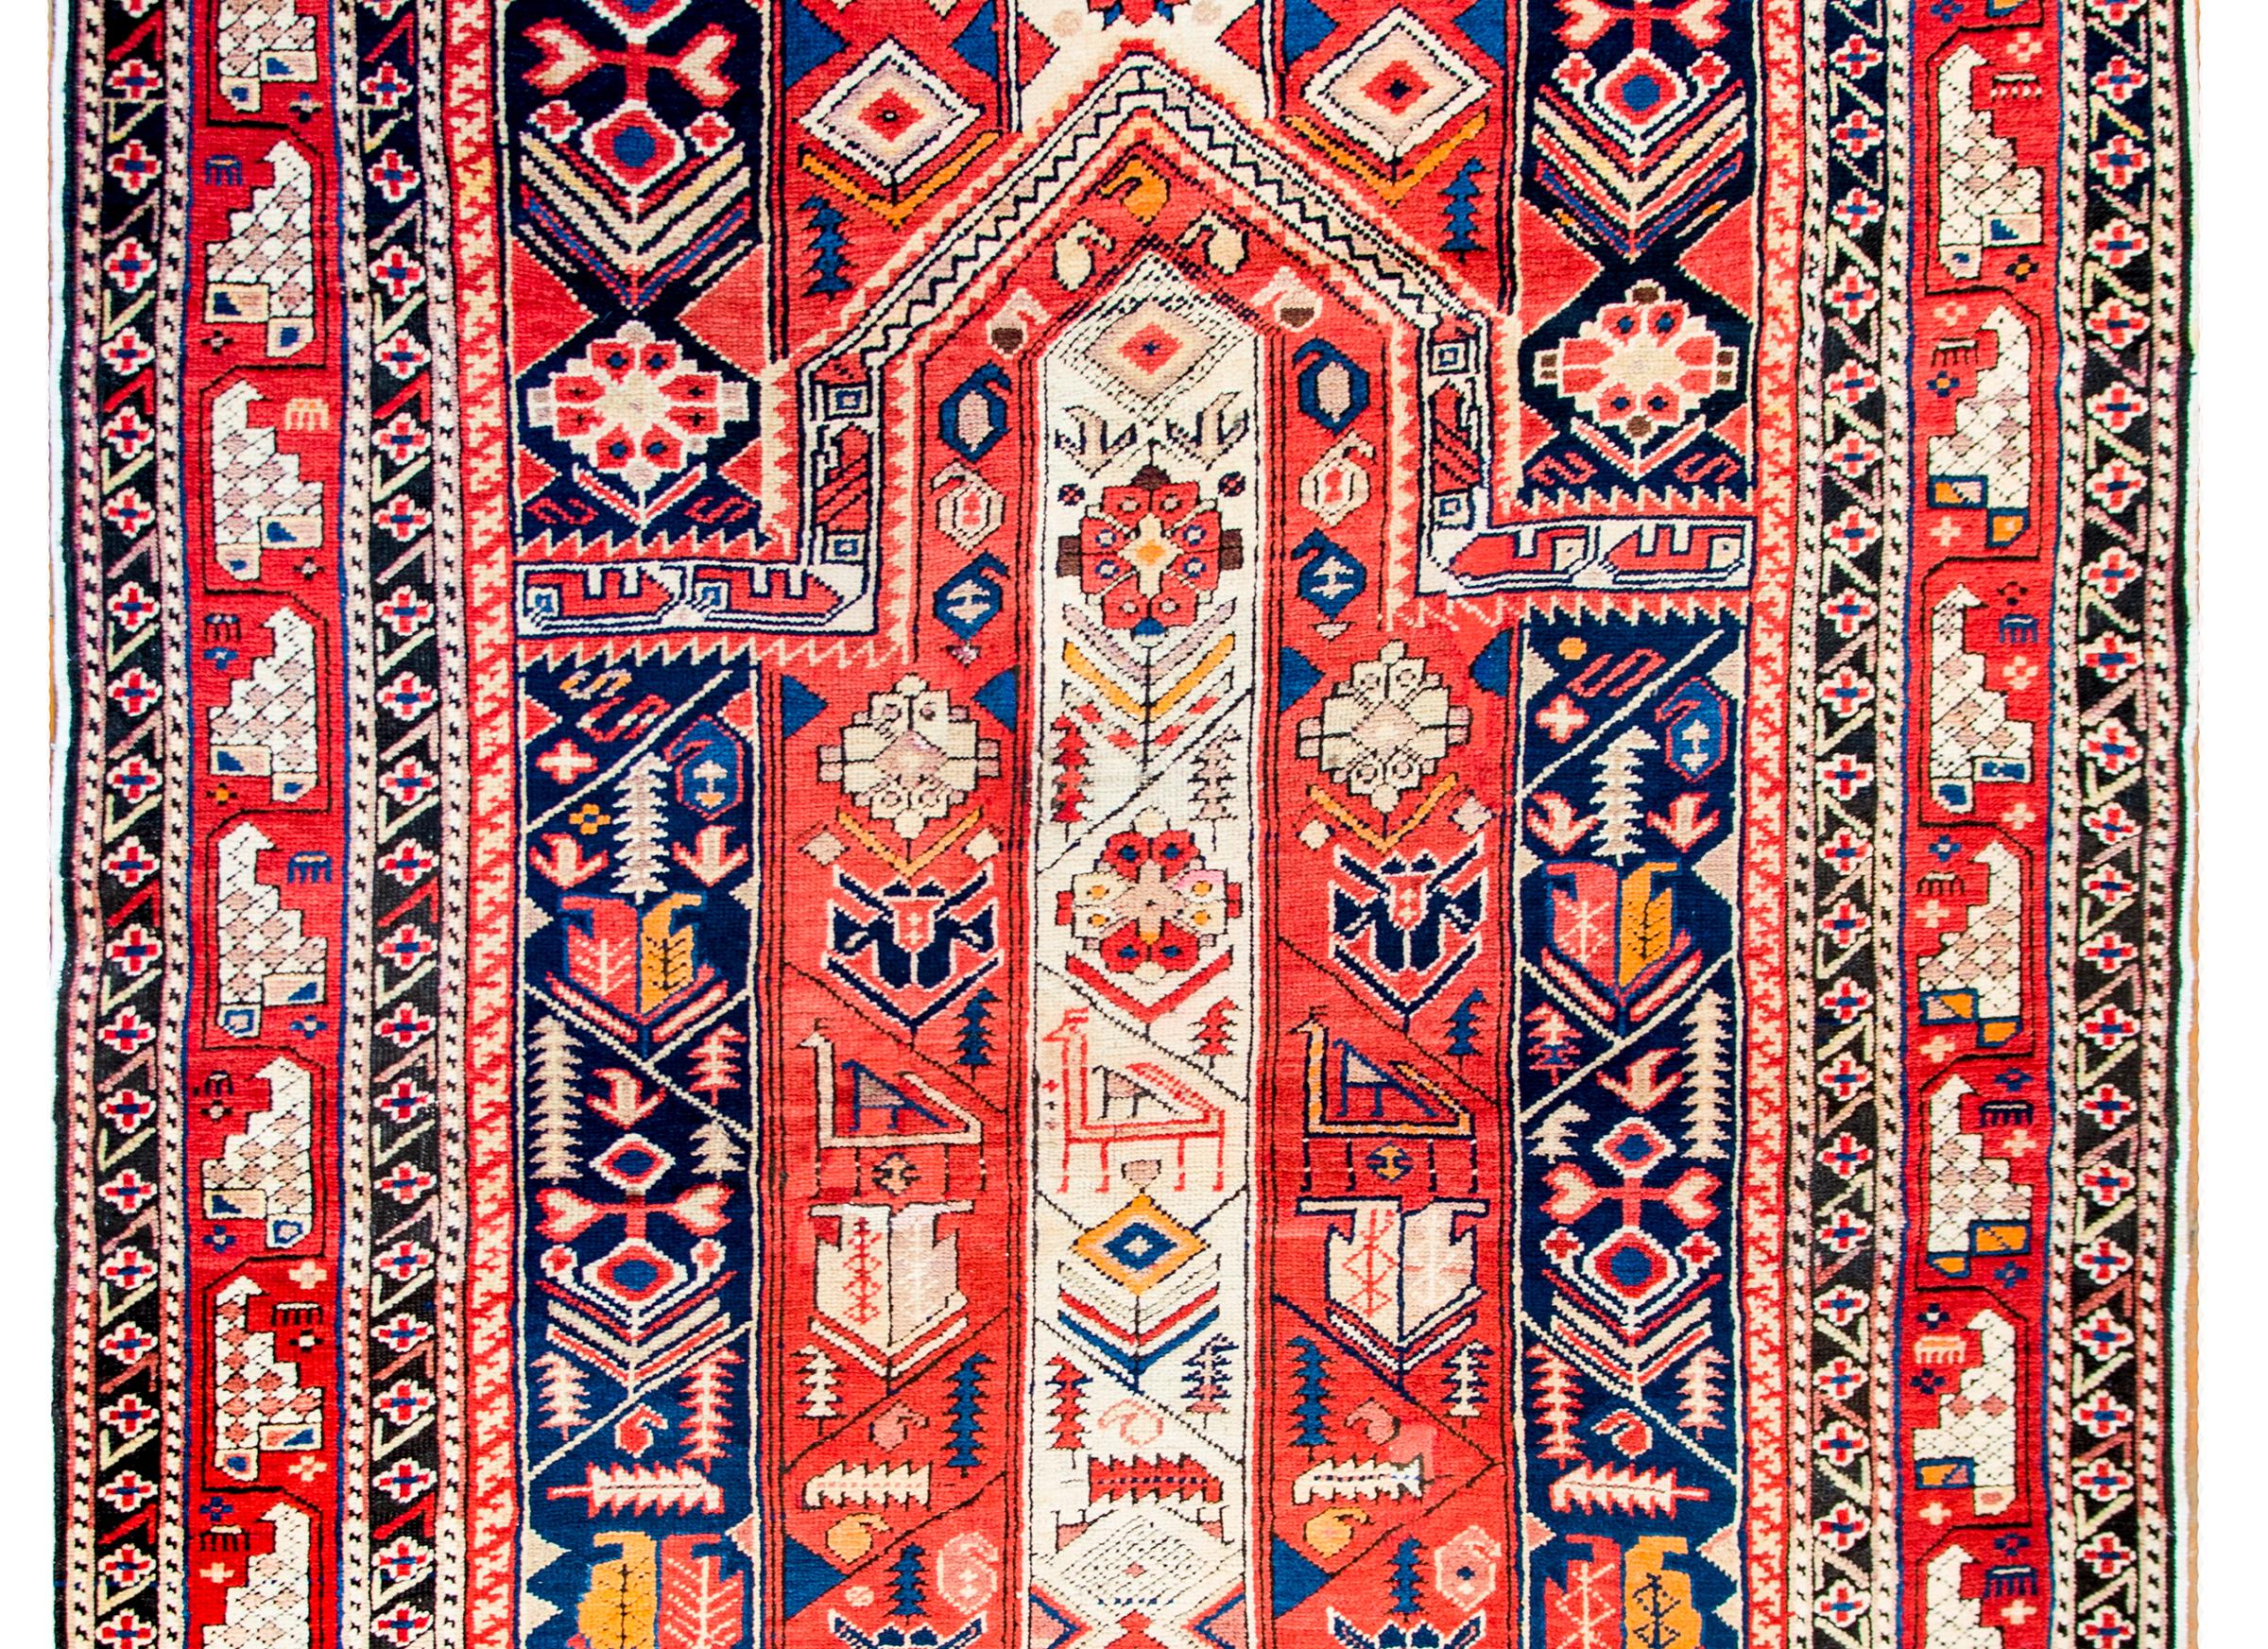 A sweet early 20th century Azerbaijani prayer rug with red, white, and blue stripes, each with stylized flowers, leaves, and birds surrounded by a simple border of a large-scale stylized floral pattern flanked by a pair of matching petite floral